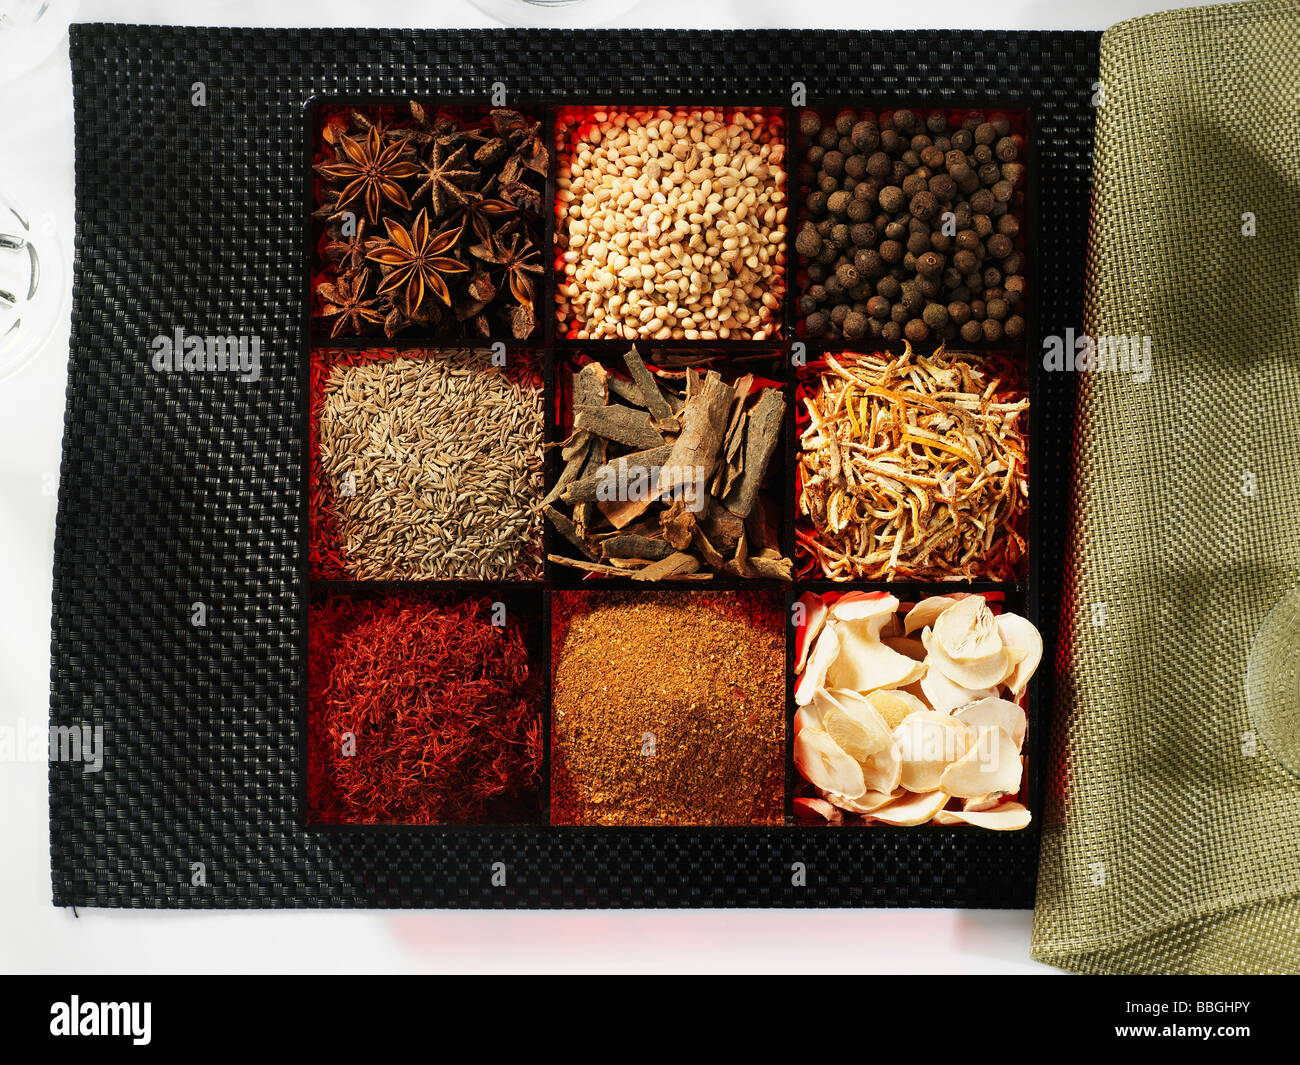 A selection of different spices in a spice box on a black background with a green napkin Stock Photo